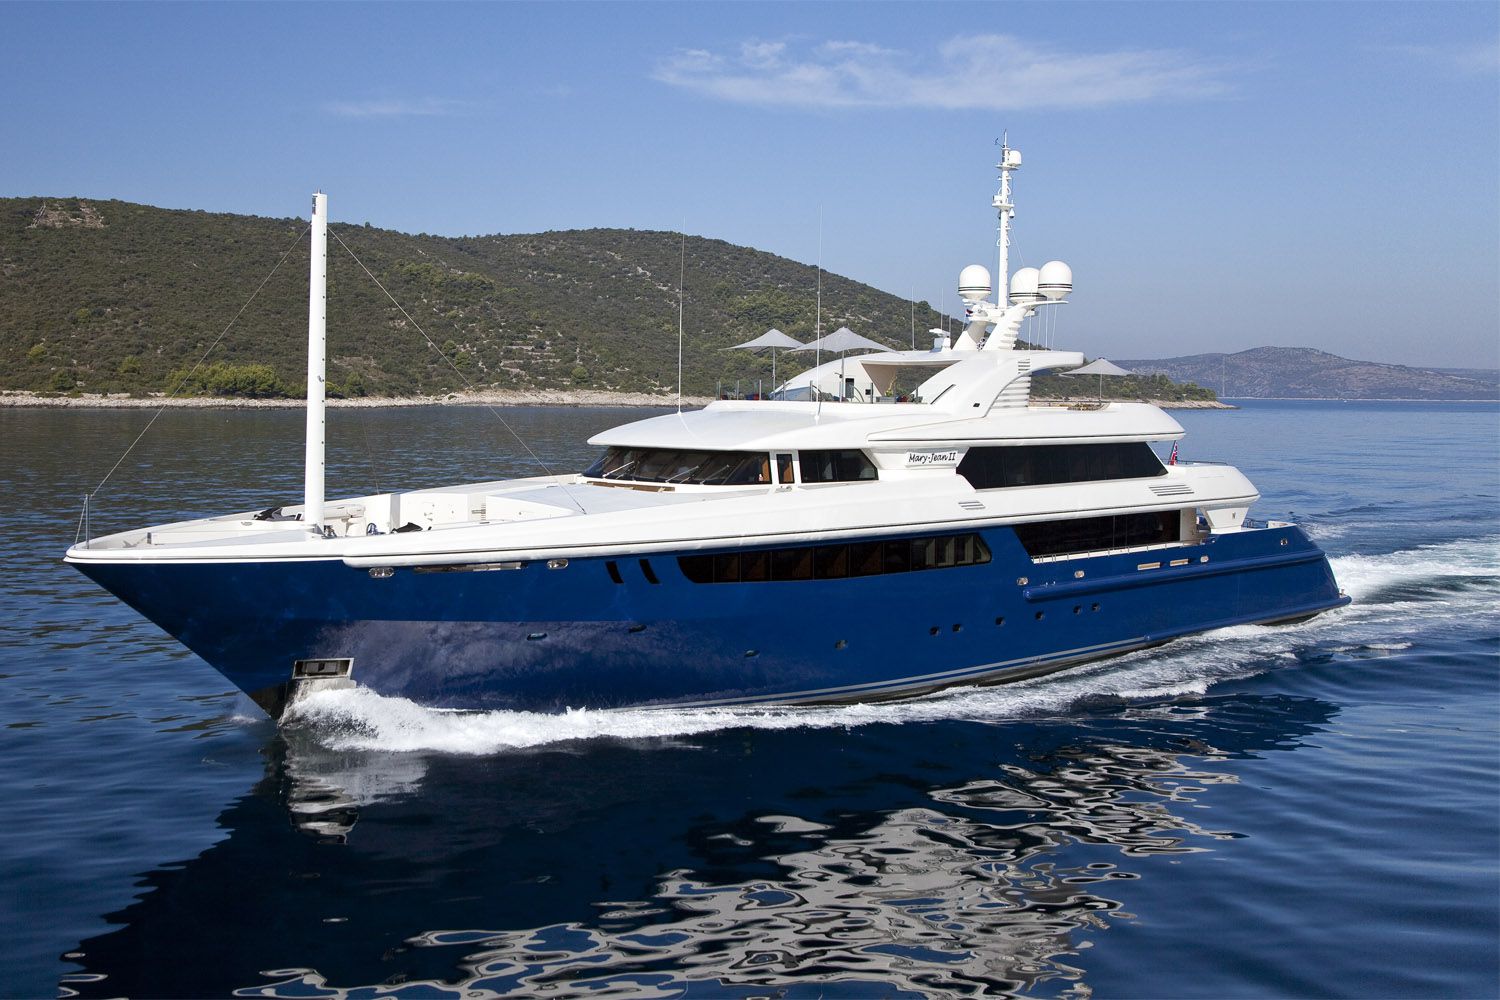 Yacht MARY JEAN II By ISA - Profile Underway In The Mediterranean